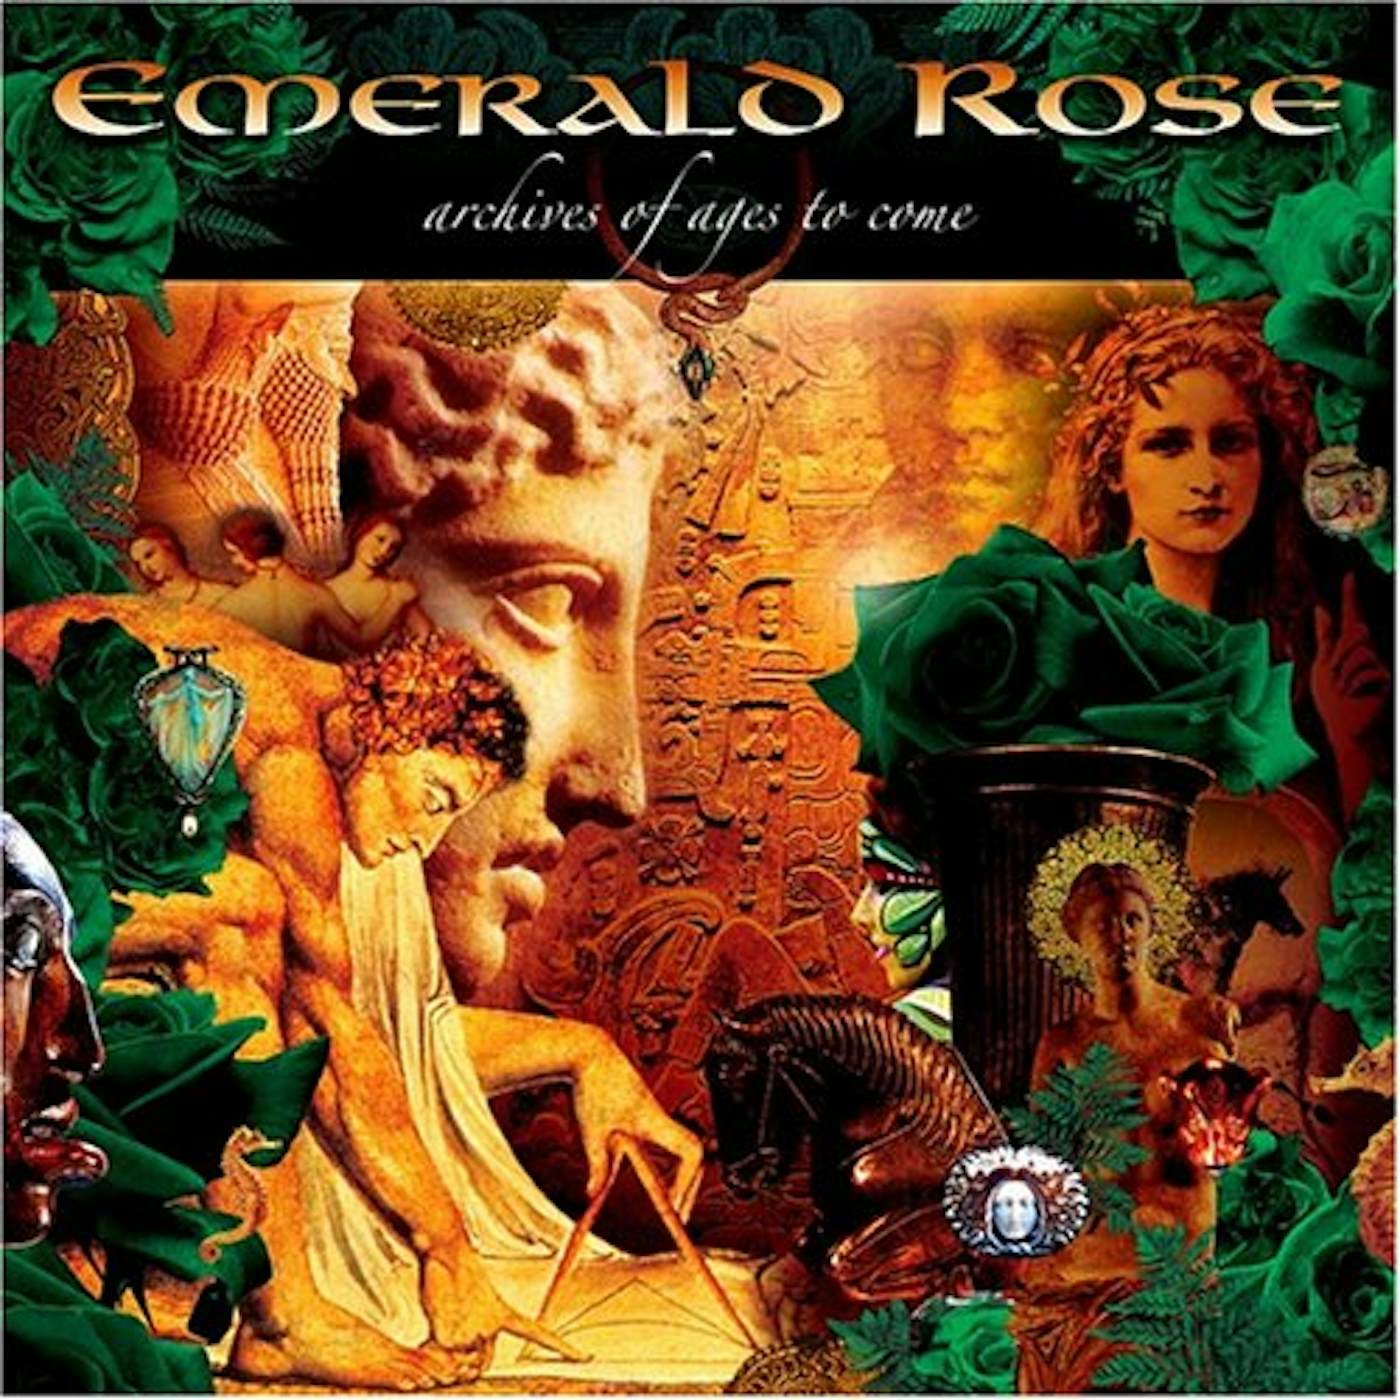 Emerald Rose ARCHIVES OF AGES TO COME CD